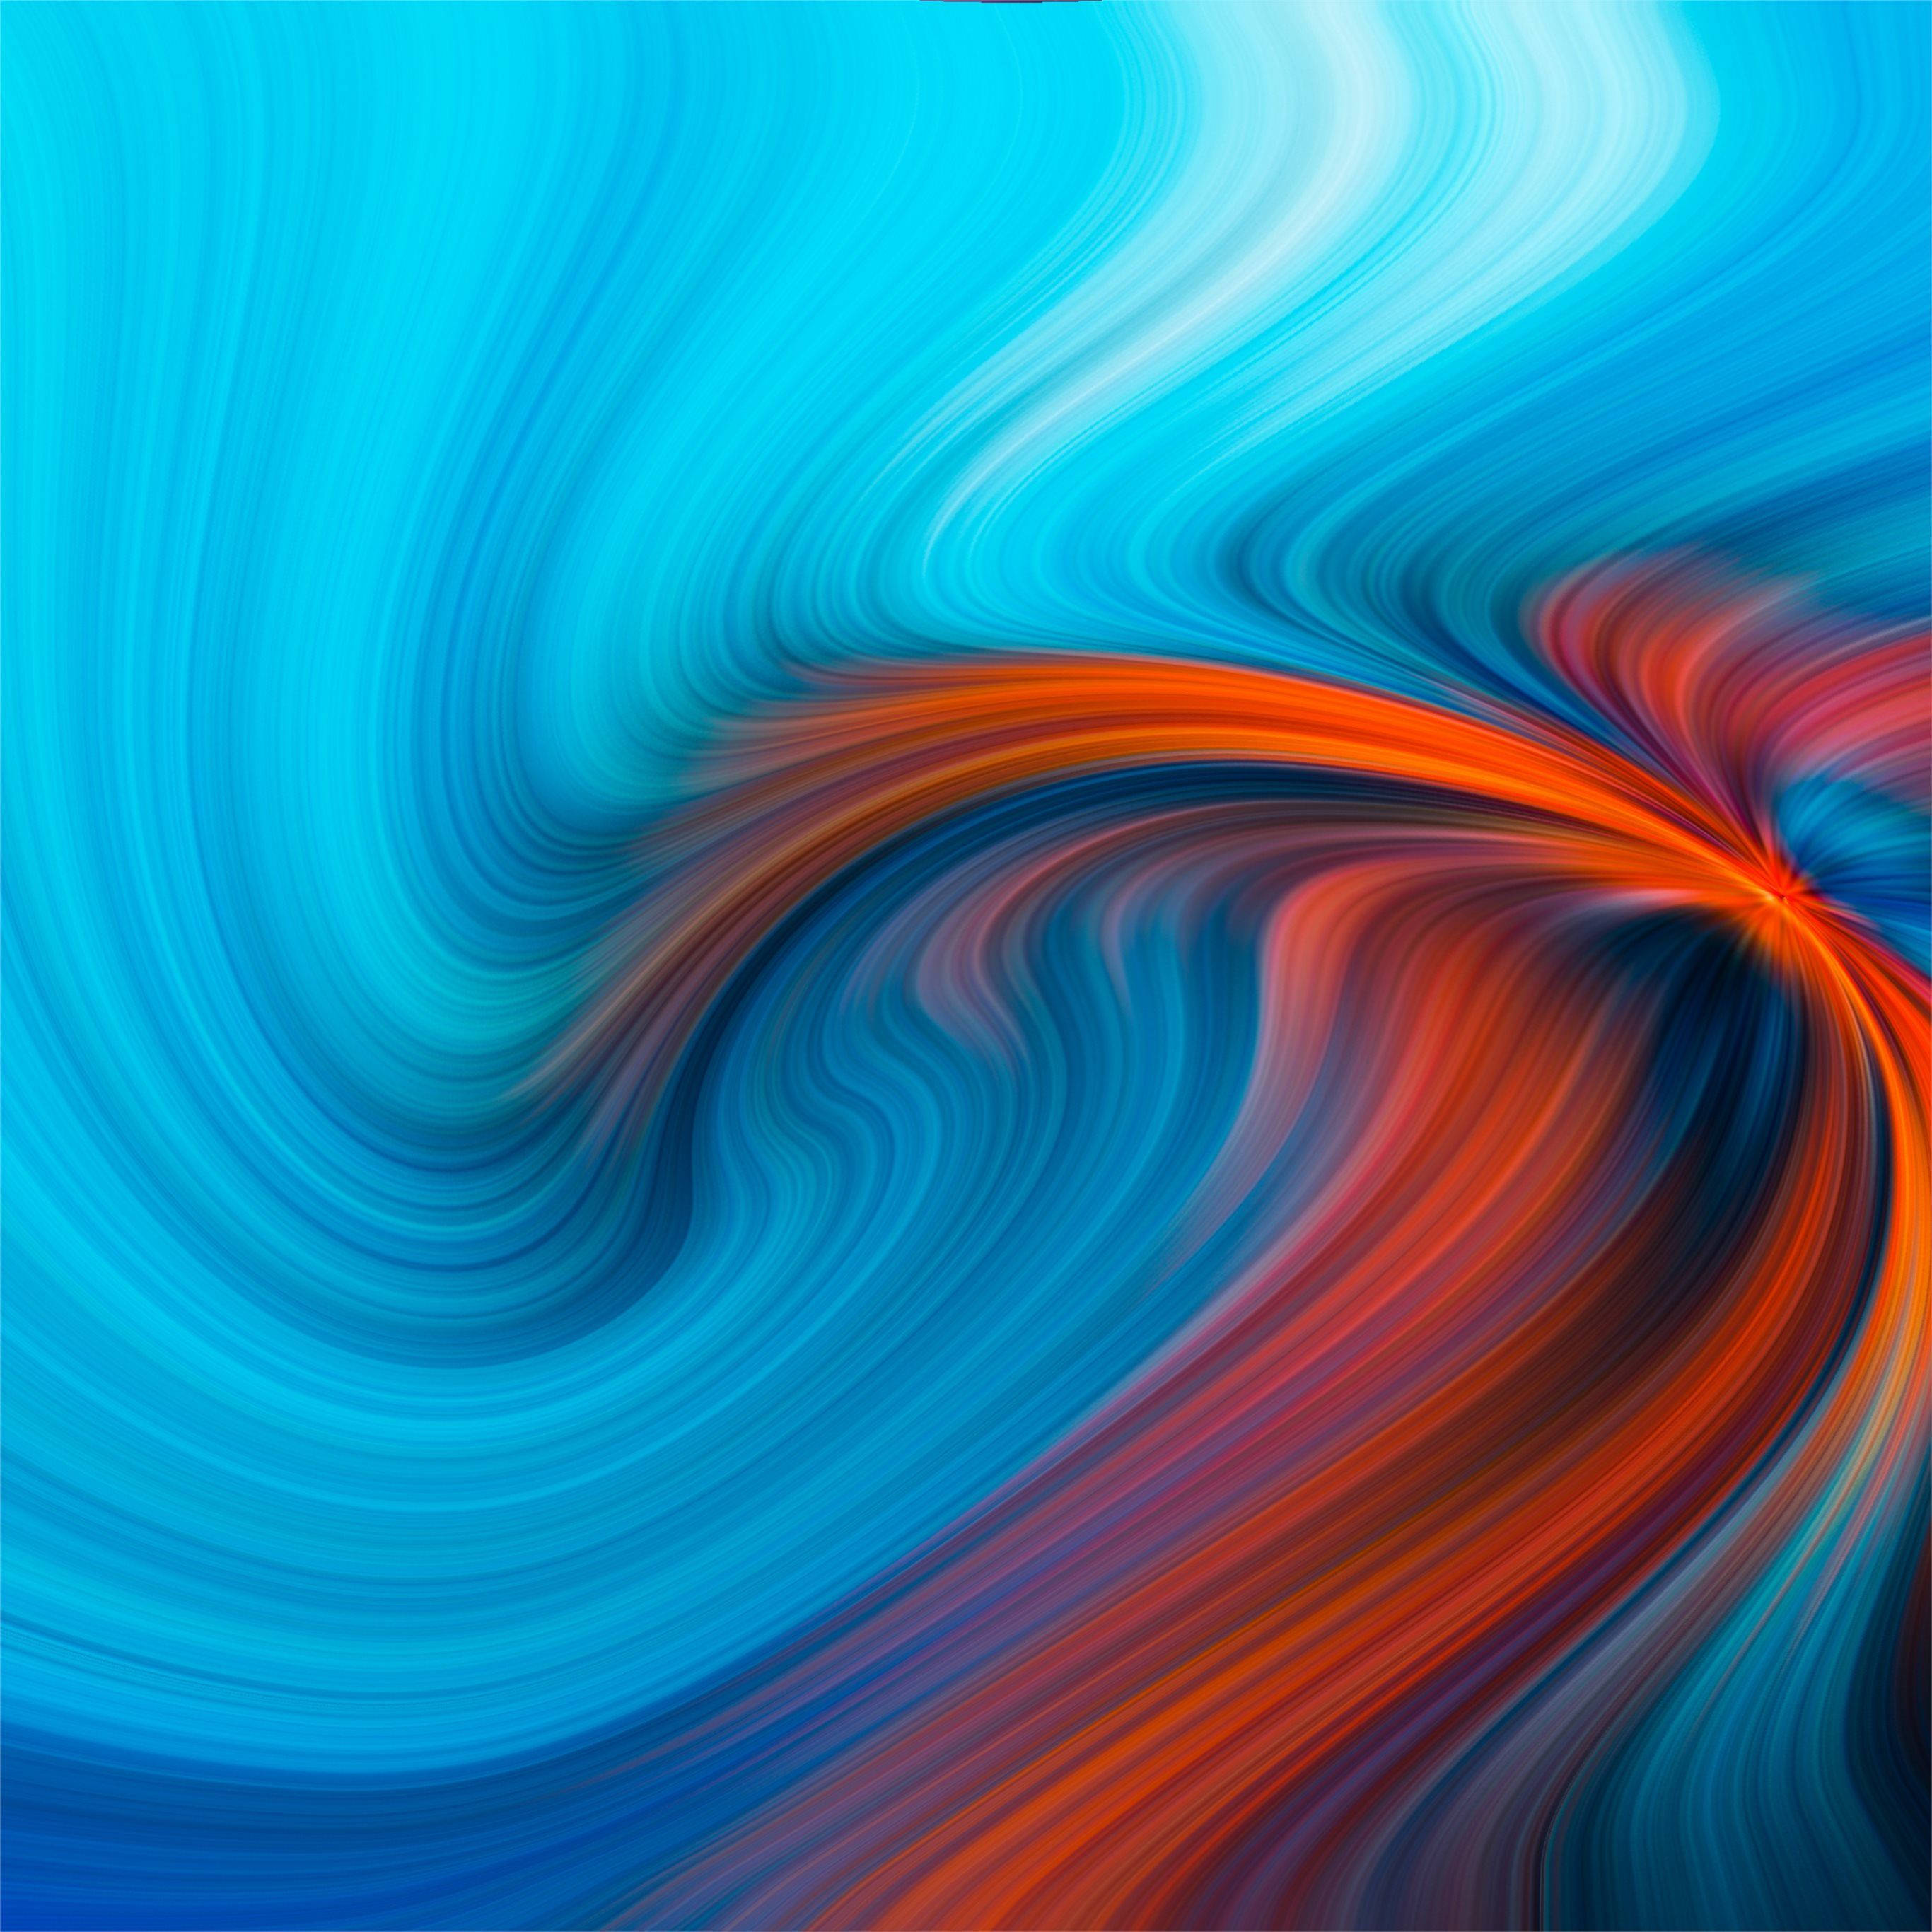 Abstract Illustration As Official Ipad Theme Picture